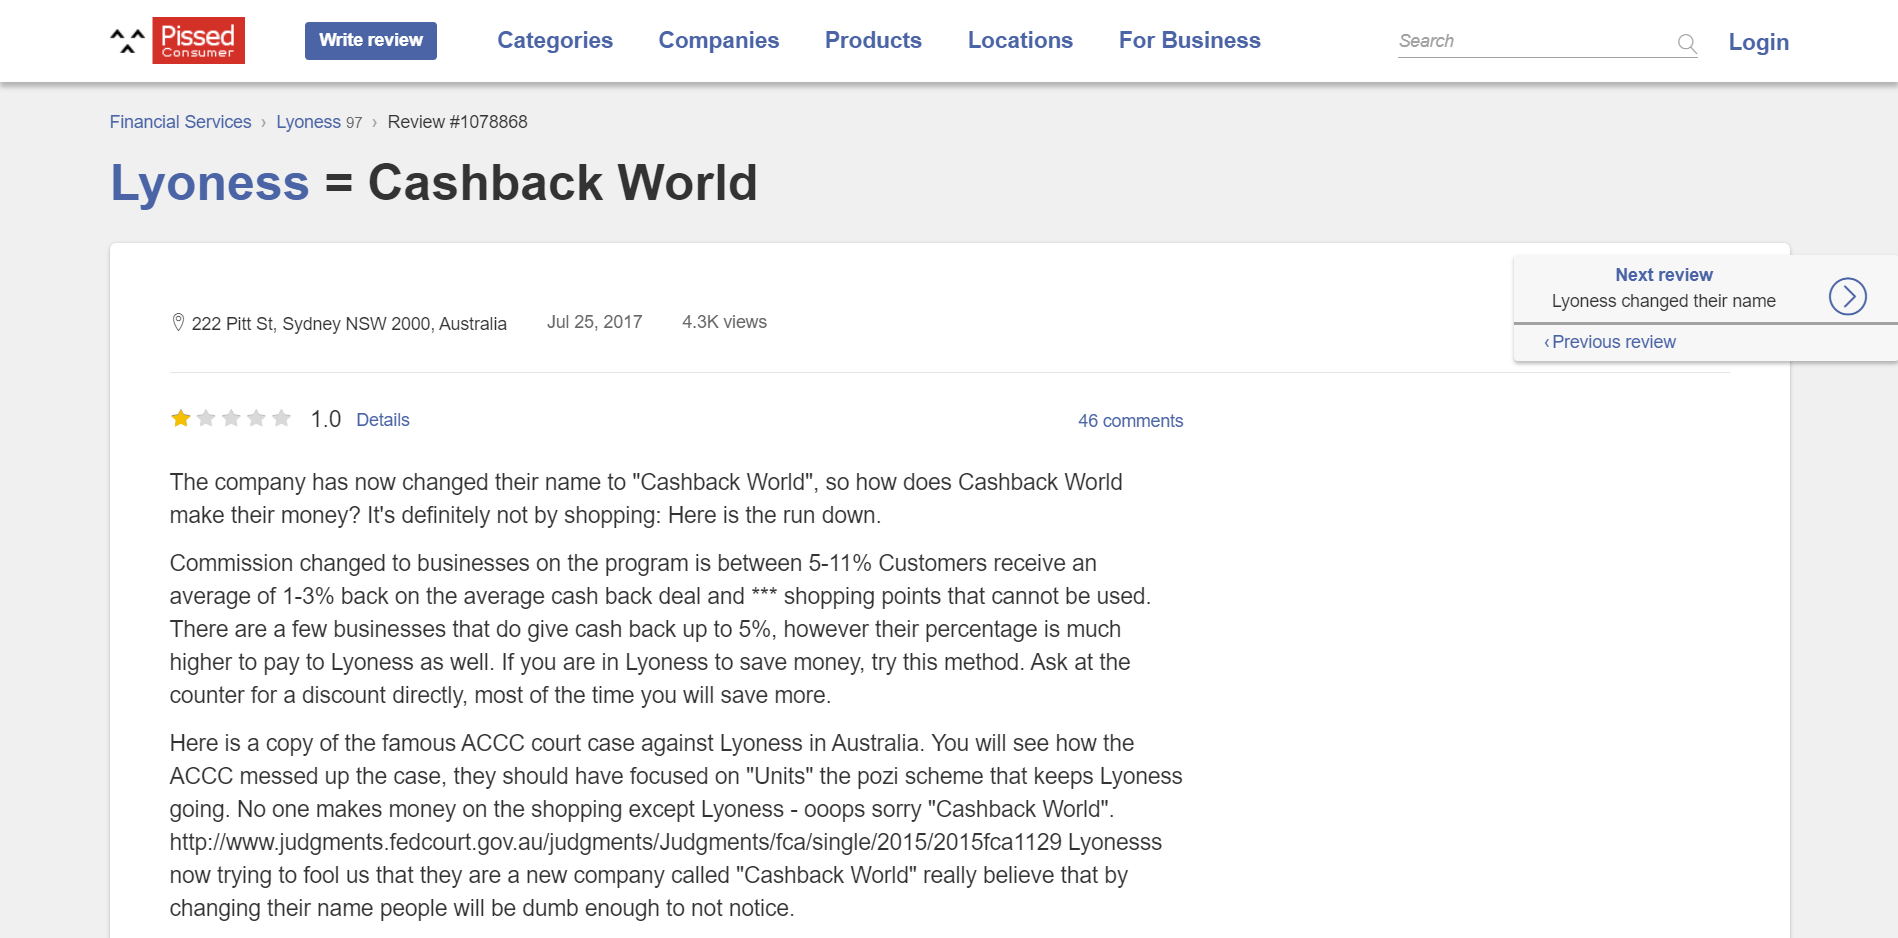 Other Cashback World review